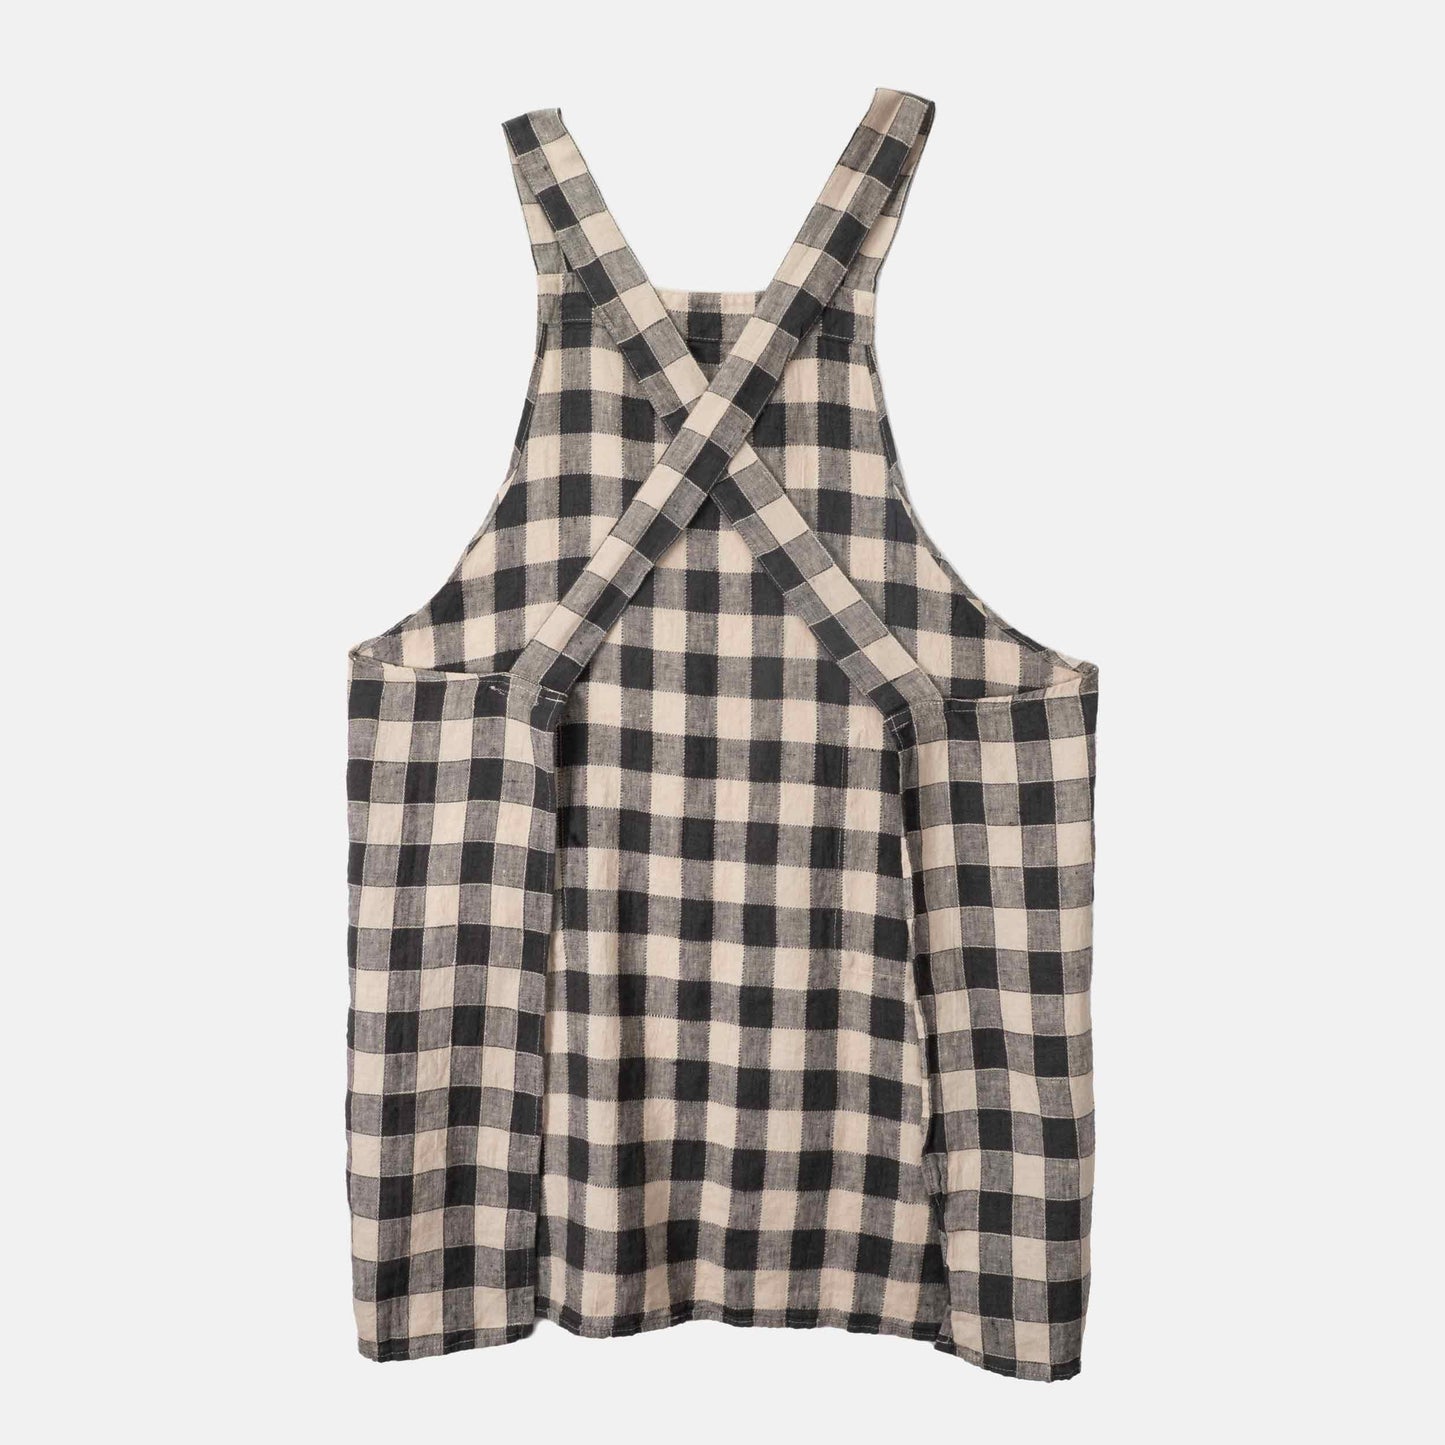 French Linen Apron in Black/ Cream Gingham